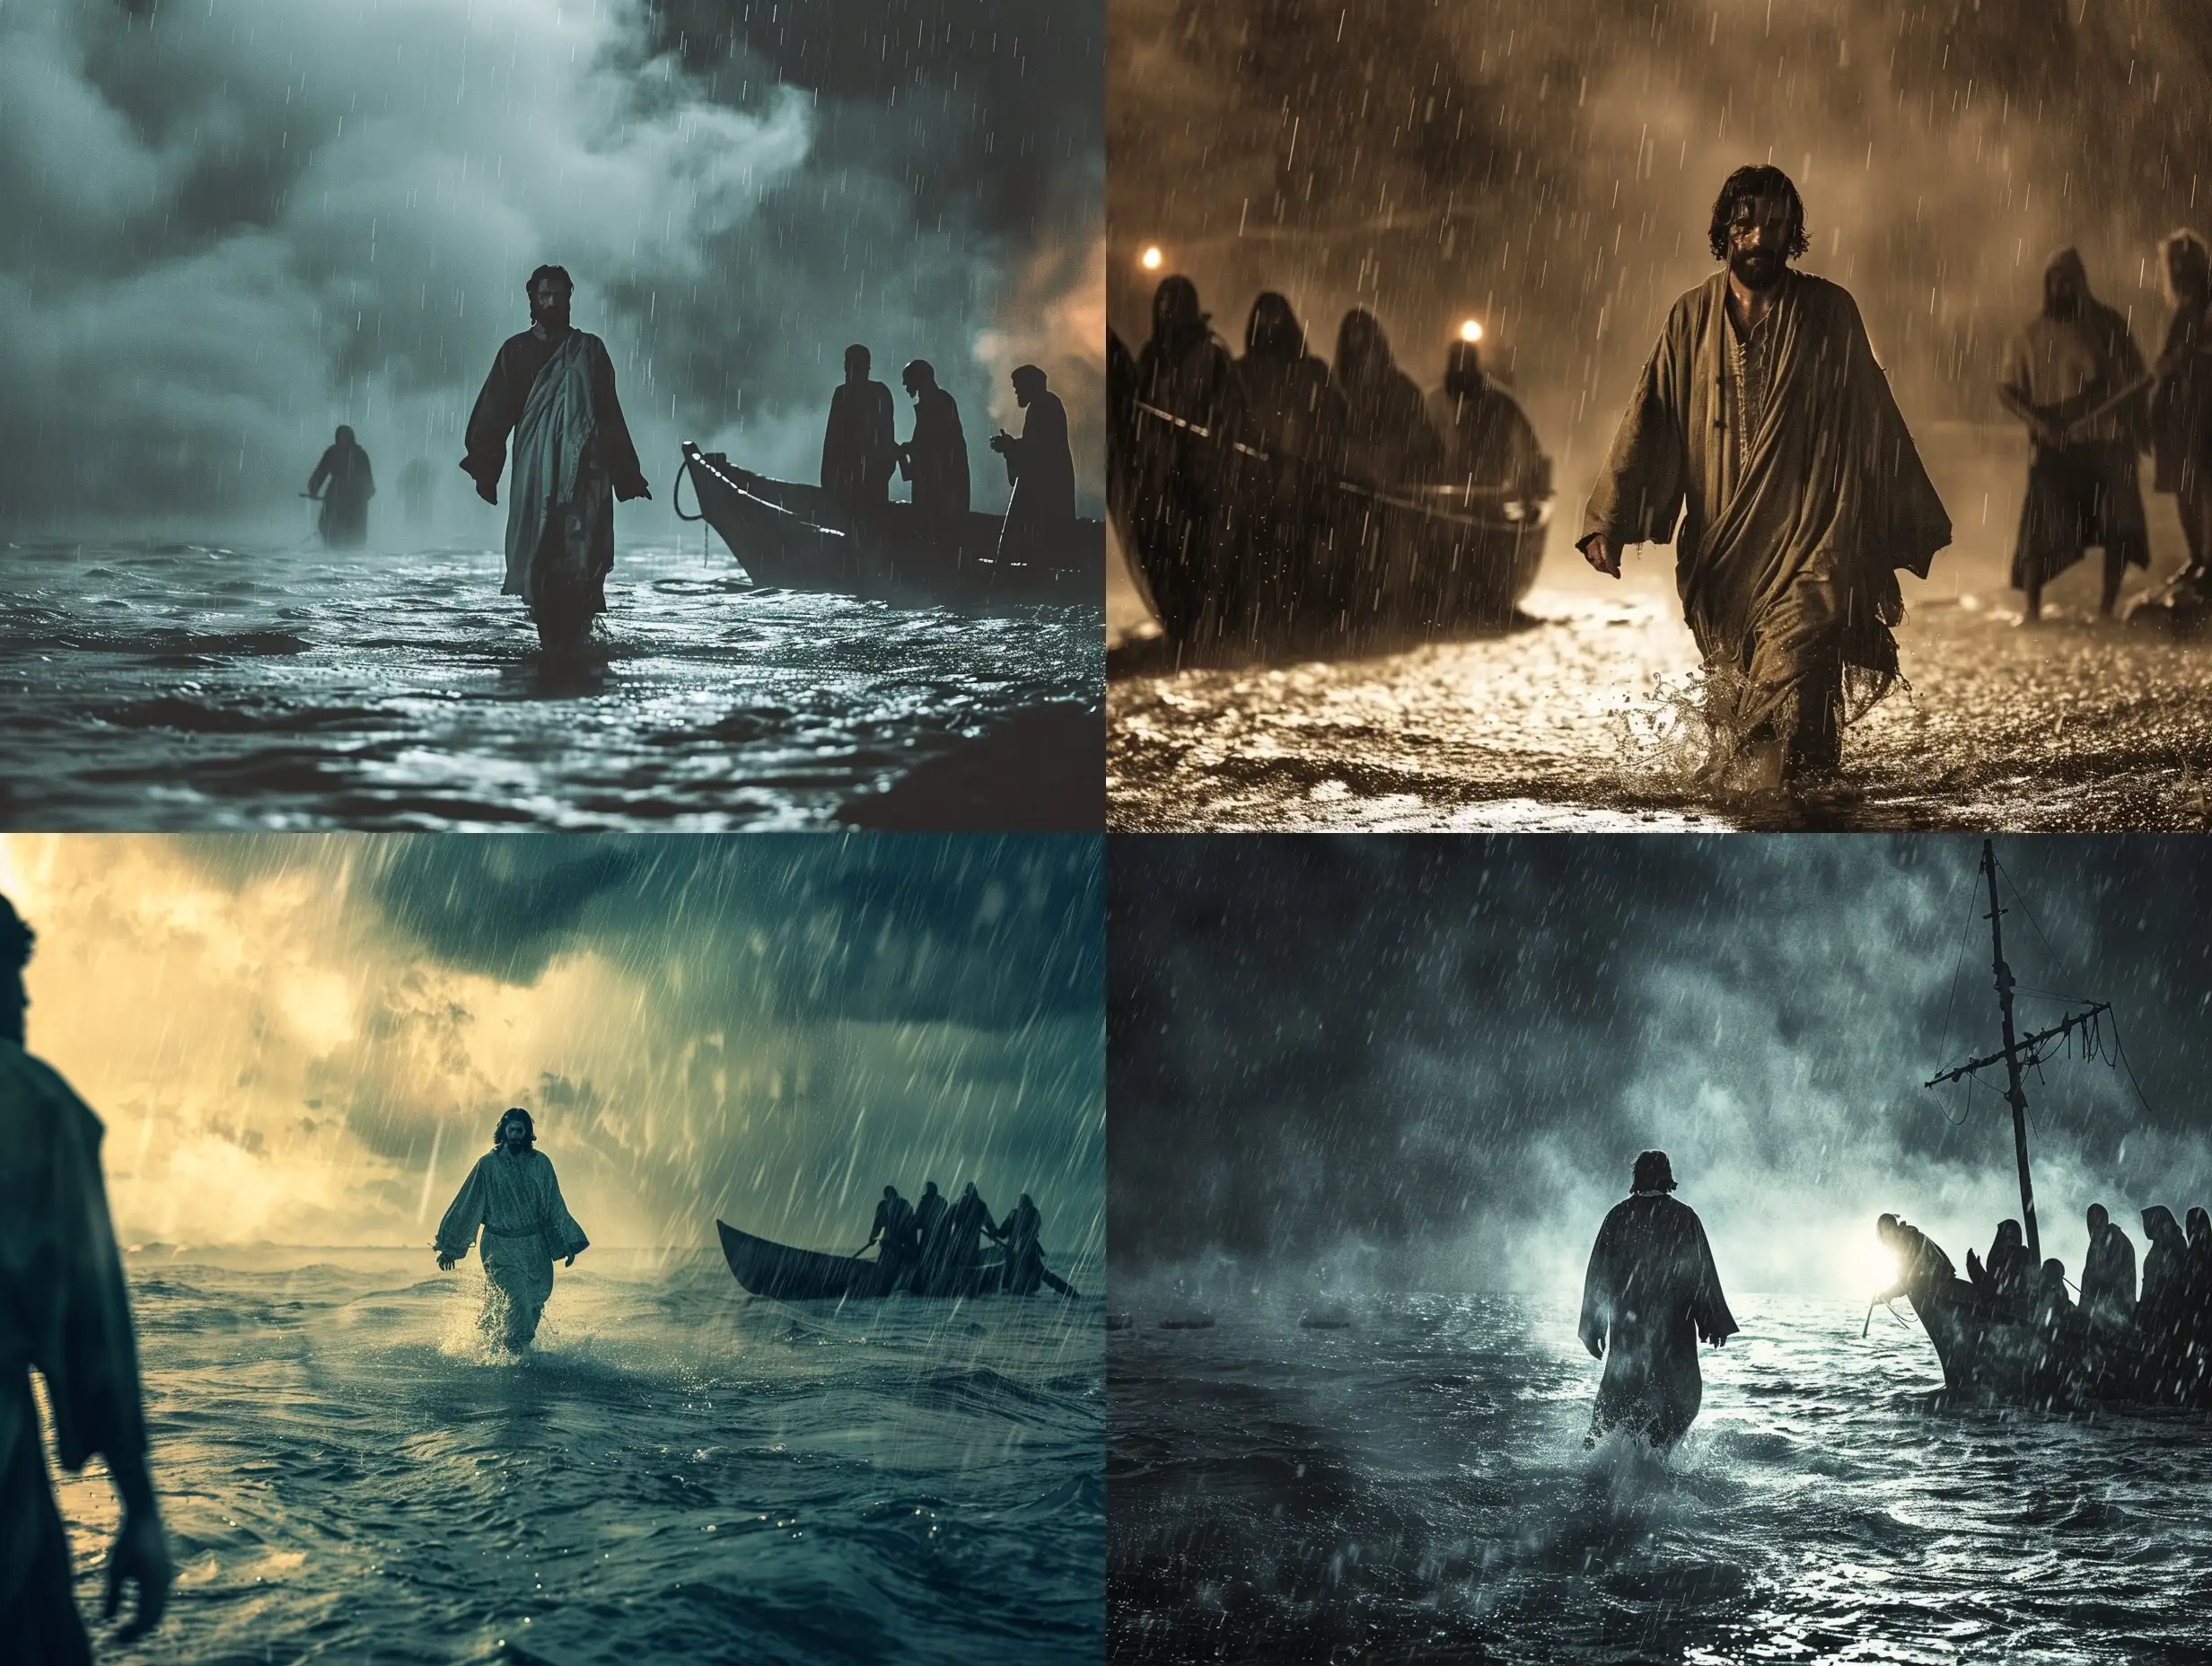 Jesus walking in the waters through a heavy rain and a group of scary men looking at him from far away in a boat 